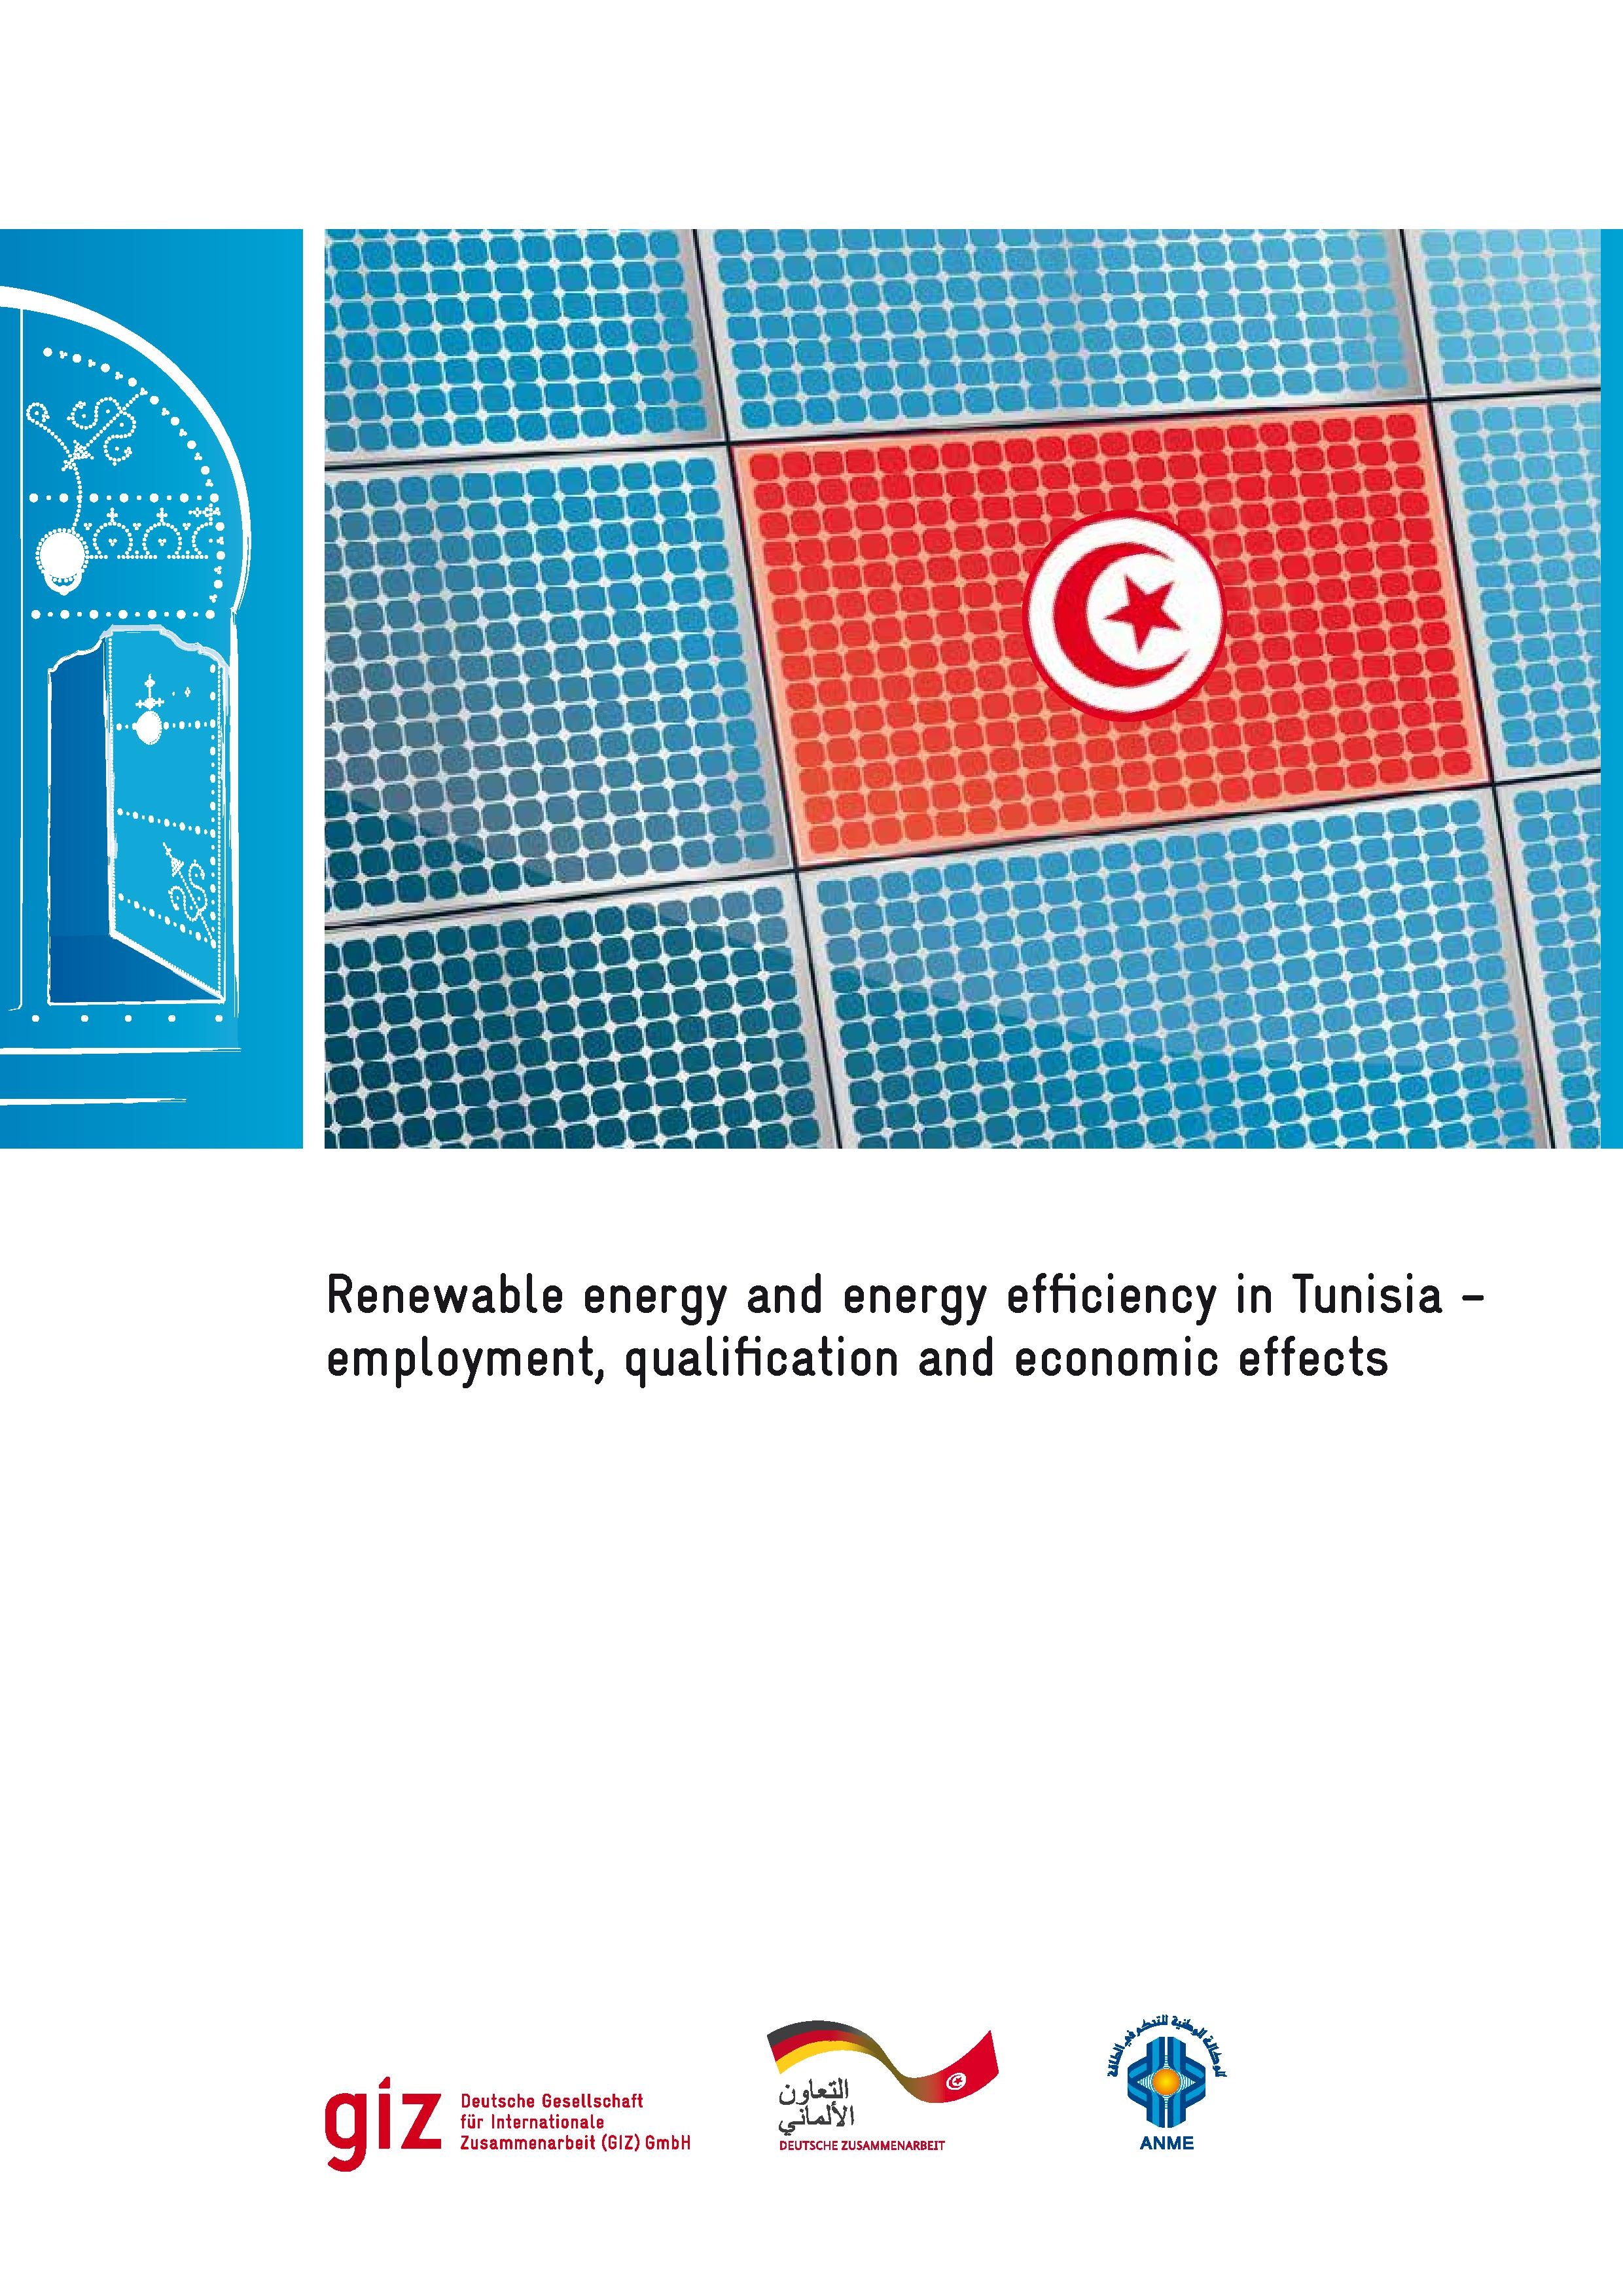 Renewable energy and energy efficiency in Tunisia GIZ 2012.pdf Promotion of Renewable Energies and Energy Efficiency in Tunisia - Employment, Qualification and Economic Effects